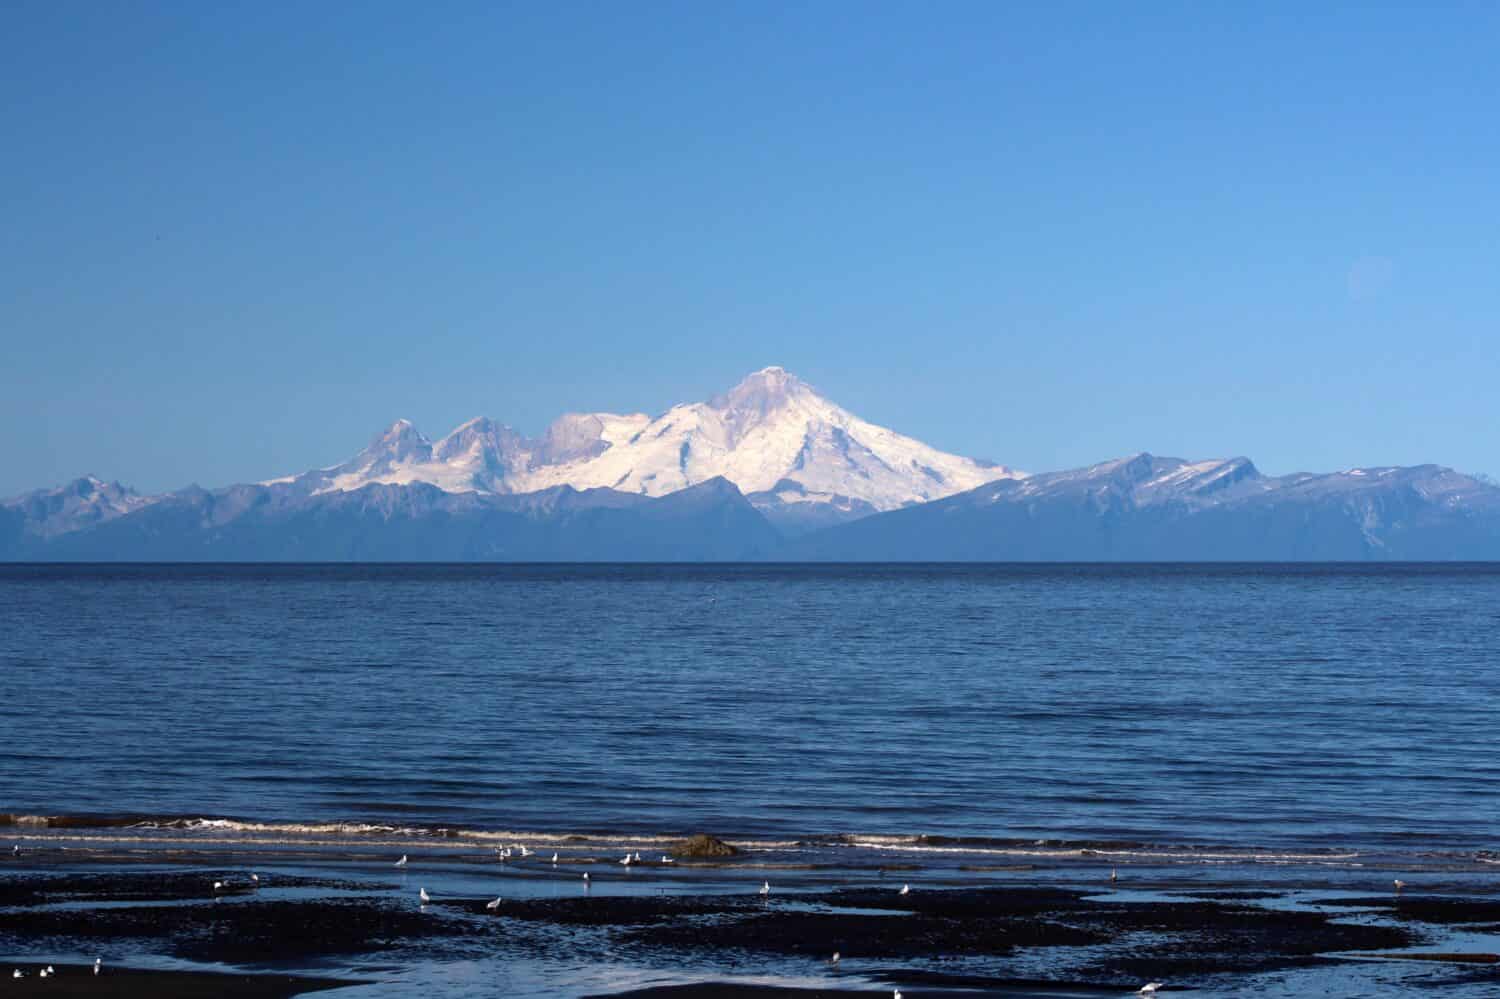 View of the Cook Inlet in Alaska with Mount Iliamna in the background